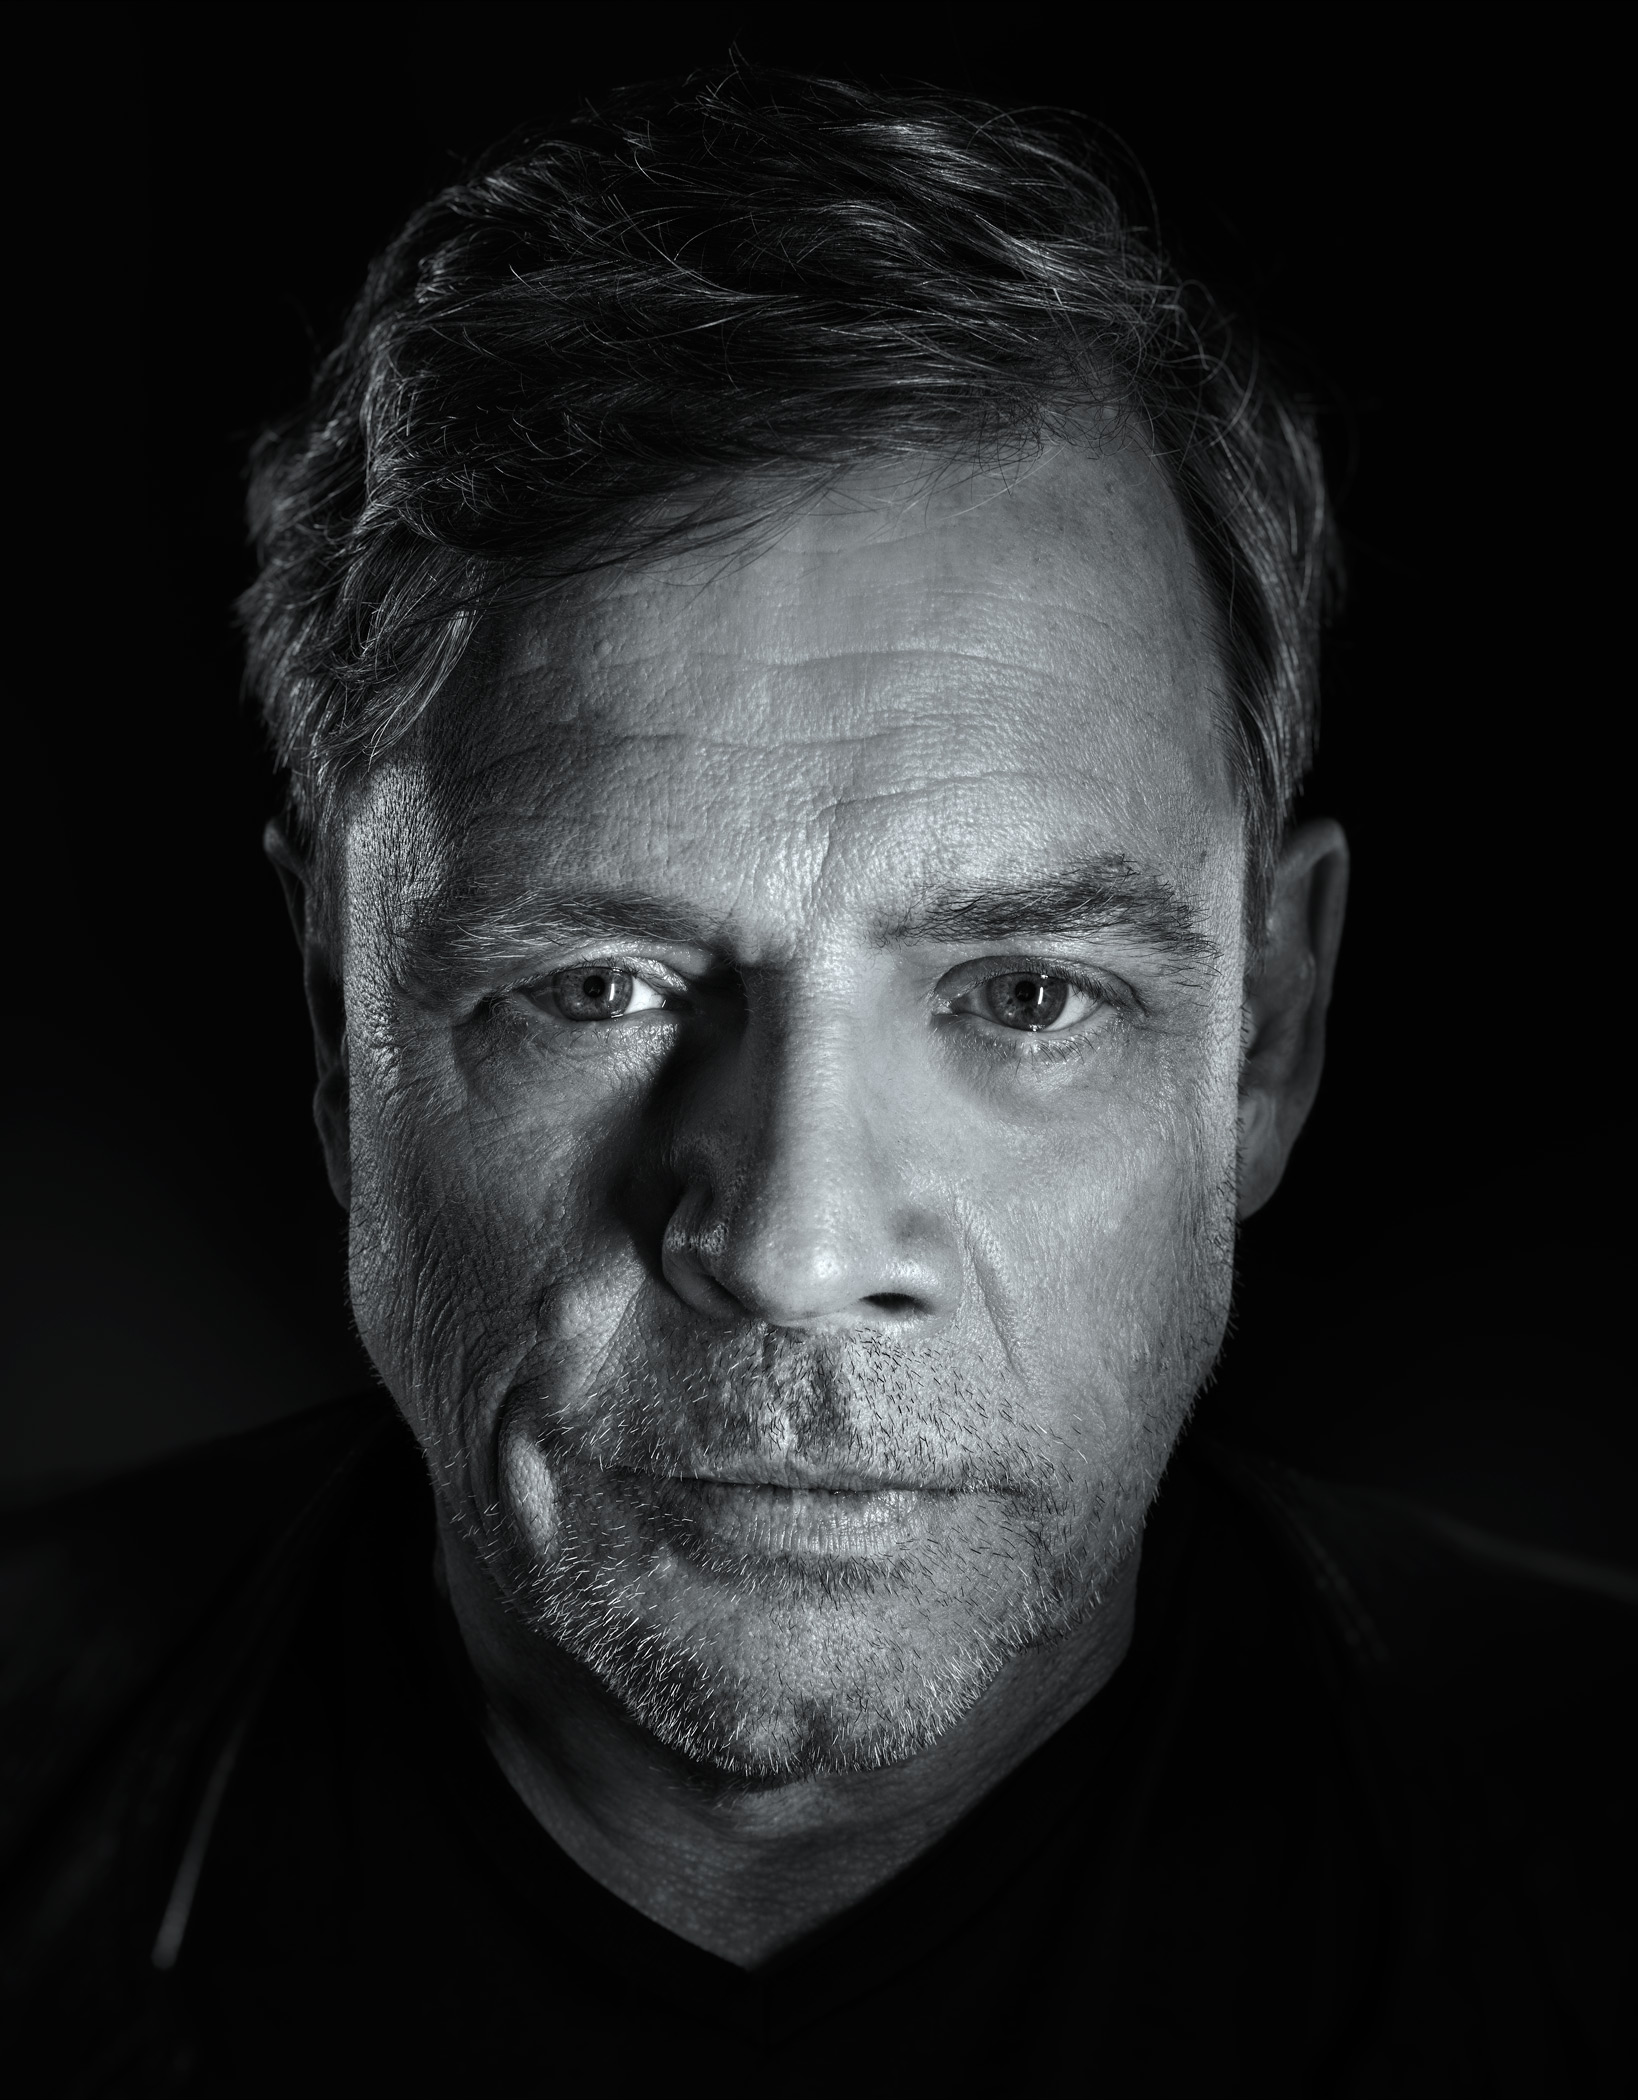 Mark Hamill photographed for TIME on October 27, 2015 in Los Angeles.From  Meet the Cast of Star Wars: The Force Awakens